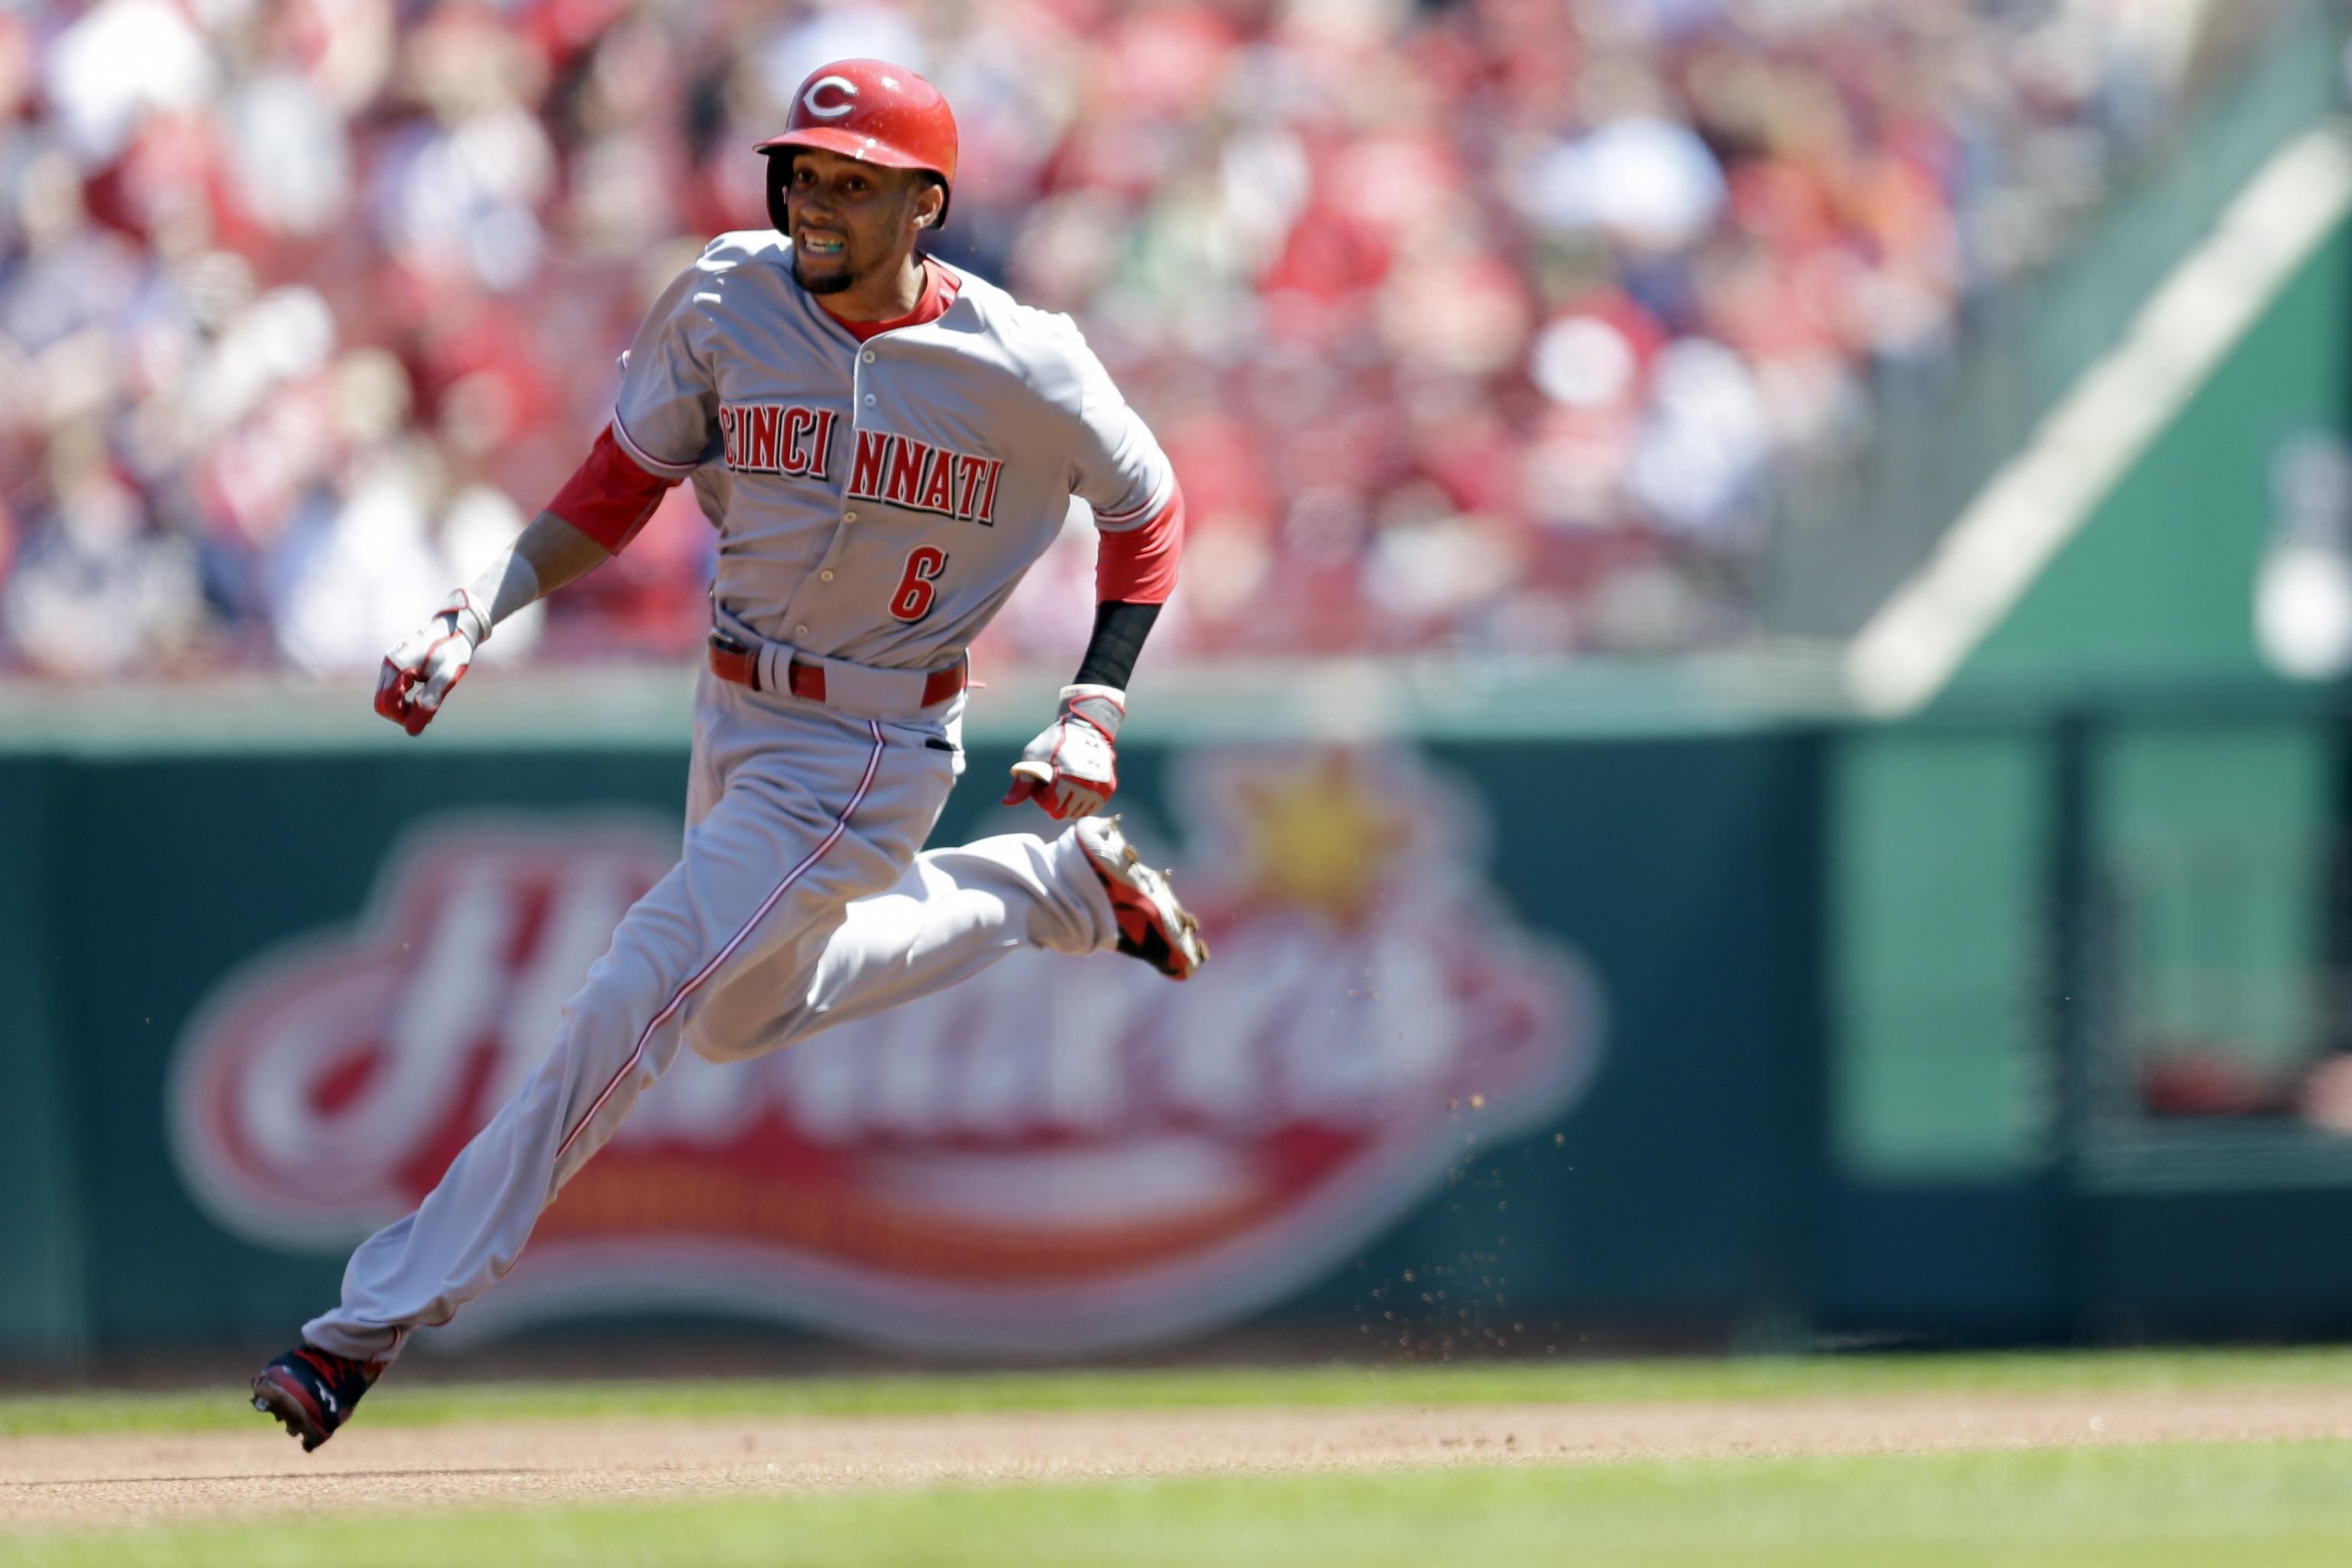 Reds prospect Billy Hamilton is the fastest man in baseball - NBC